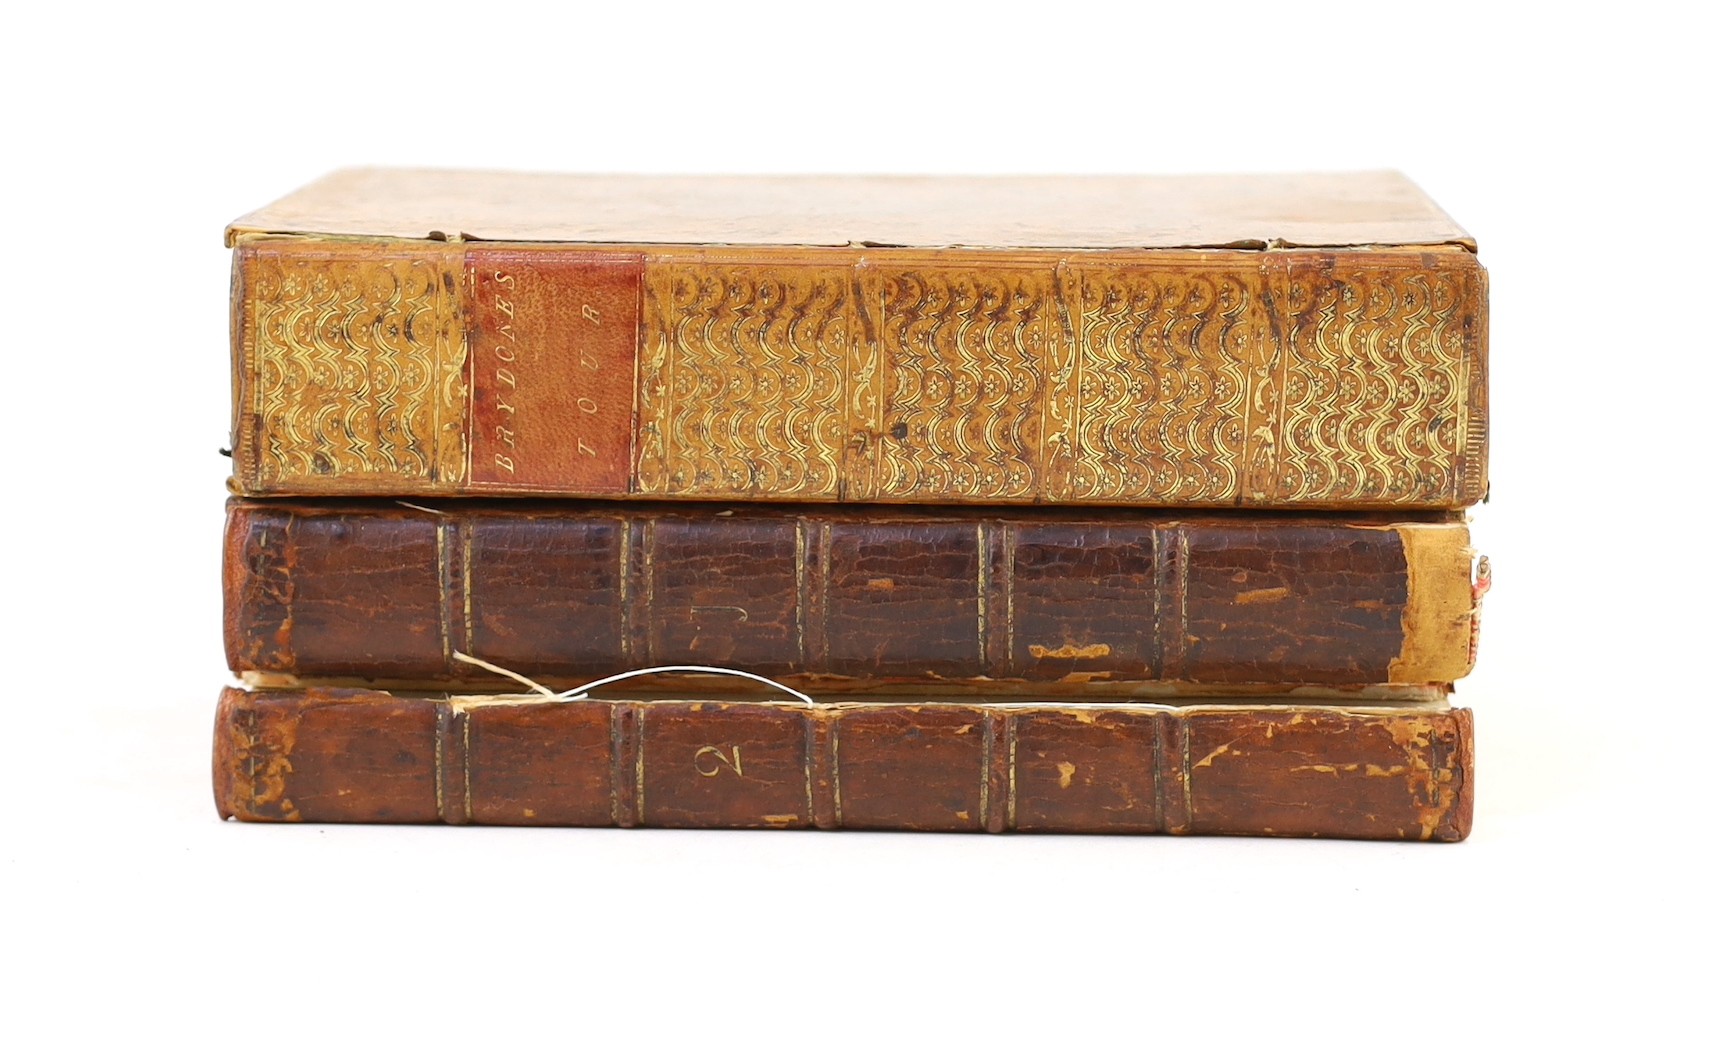 Brydone, Patrick - A Tour through Sicily and Malta. In a series of letters to William Beckford ,Esq. ... First edition, 2 vols, half title, errata leaf; old calf with panelled spines (distressed). 1773